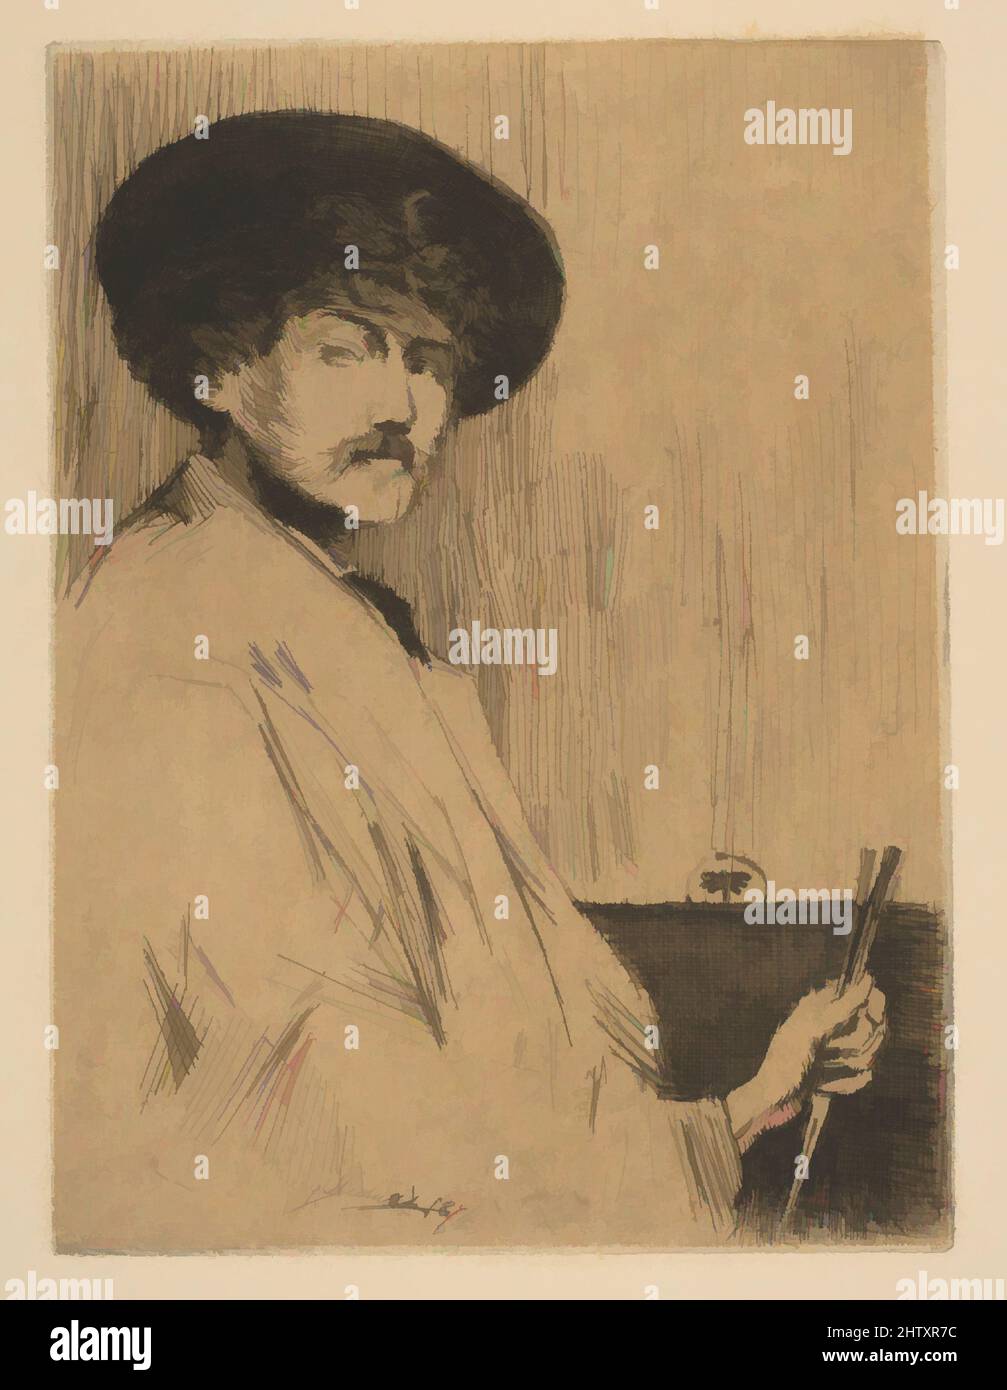 Art inspired by James McNeill Whistler, 1874, Etching, with lithographic tone?, plate: 5 1/8 x 3 13/16 in. (13 x 9.7 cm), Prints, Percy Thomas (British, London 1846–1922 London, Classic works modernized by Artotop with a splash of modernity. Shapes, color and value, eye-catching visual impact on art. Emotions through freedom of artworks in a contemporary way. A timeless message pursuing a wildly creative new direction. Artists turning to the digital medium and creating the Artotop NFT Stock Photo